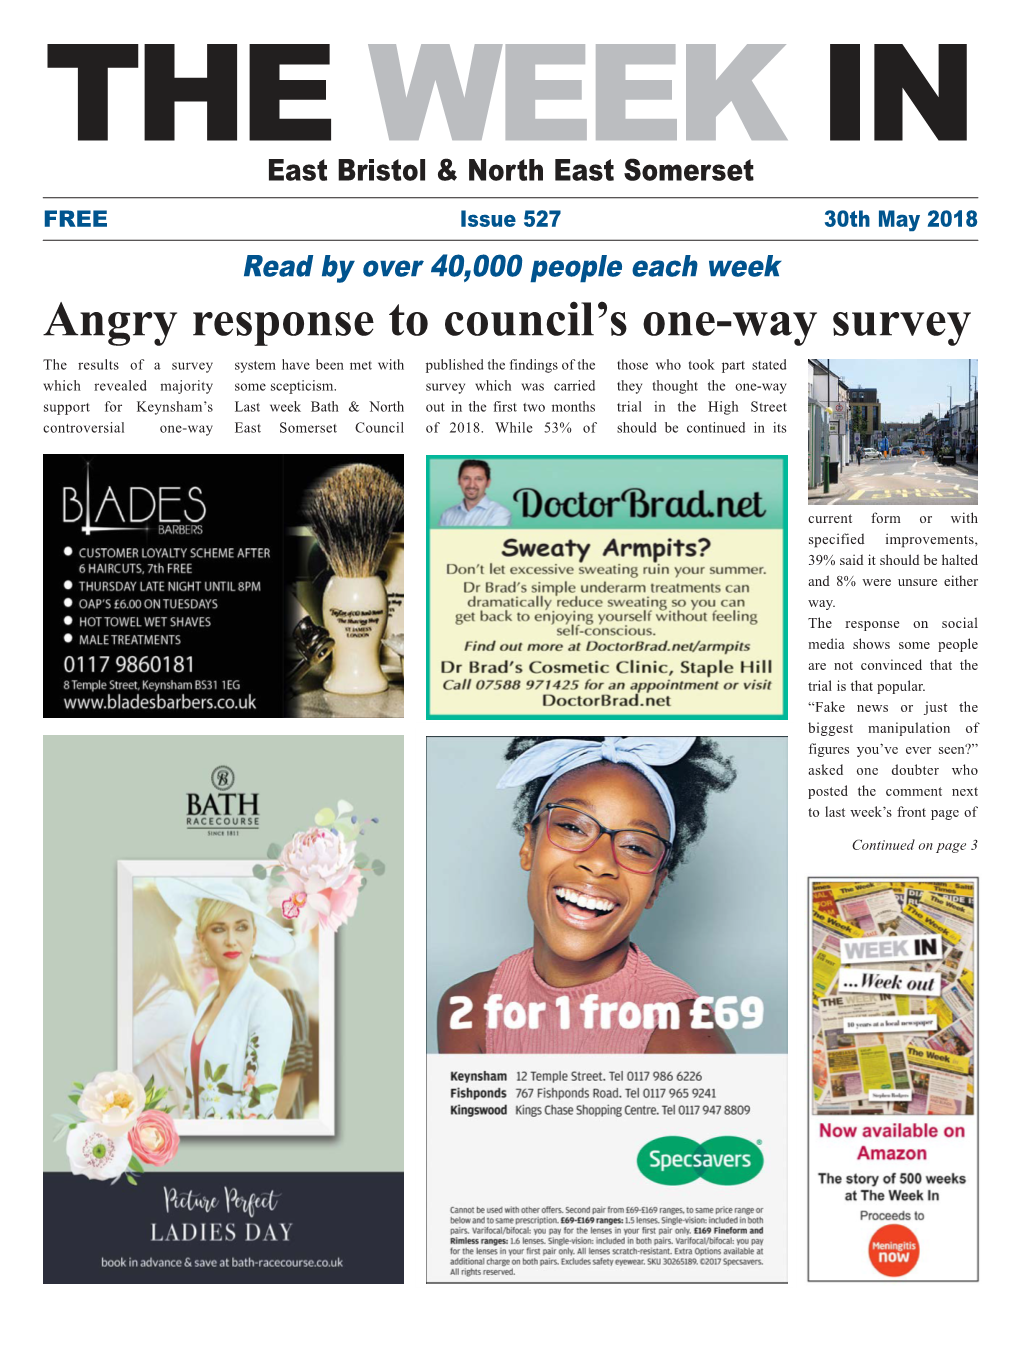 Angry Response to Council's One-Way Survey